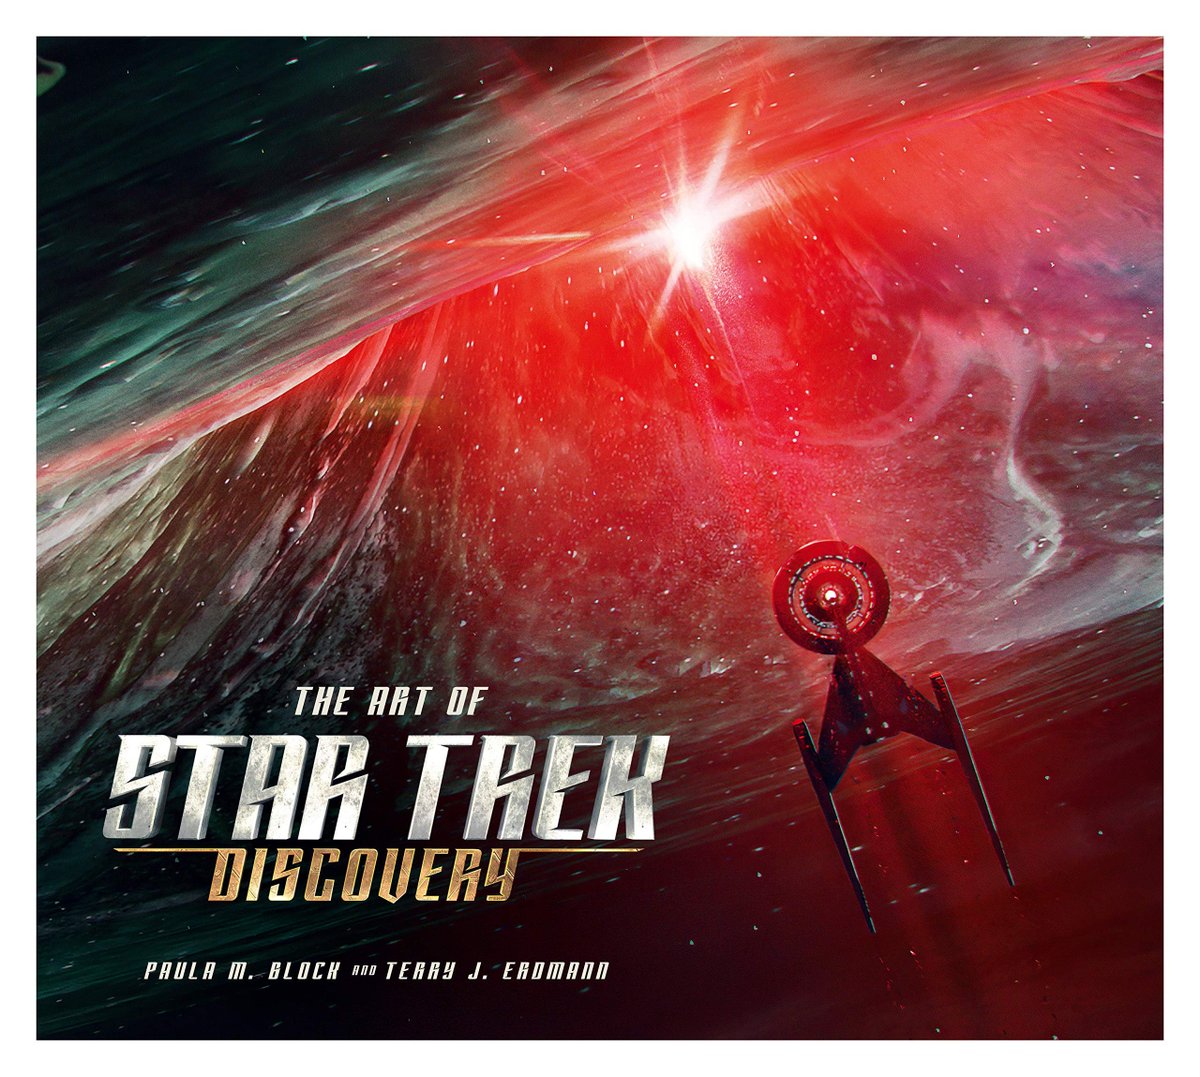 The Art of Star Trek Discovery, by Paula M. Block and Terry J. Erdmann for Titan BooksIt just went out. Another very beautiful book devoted to a TV series.